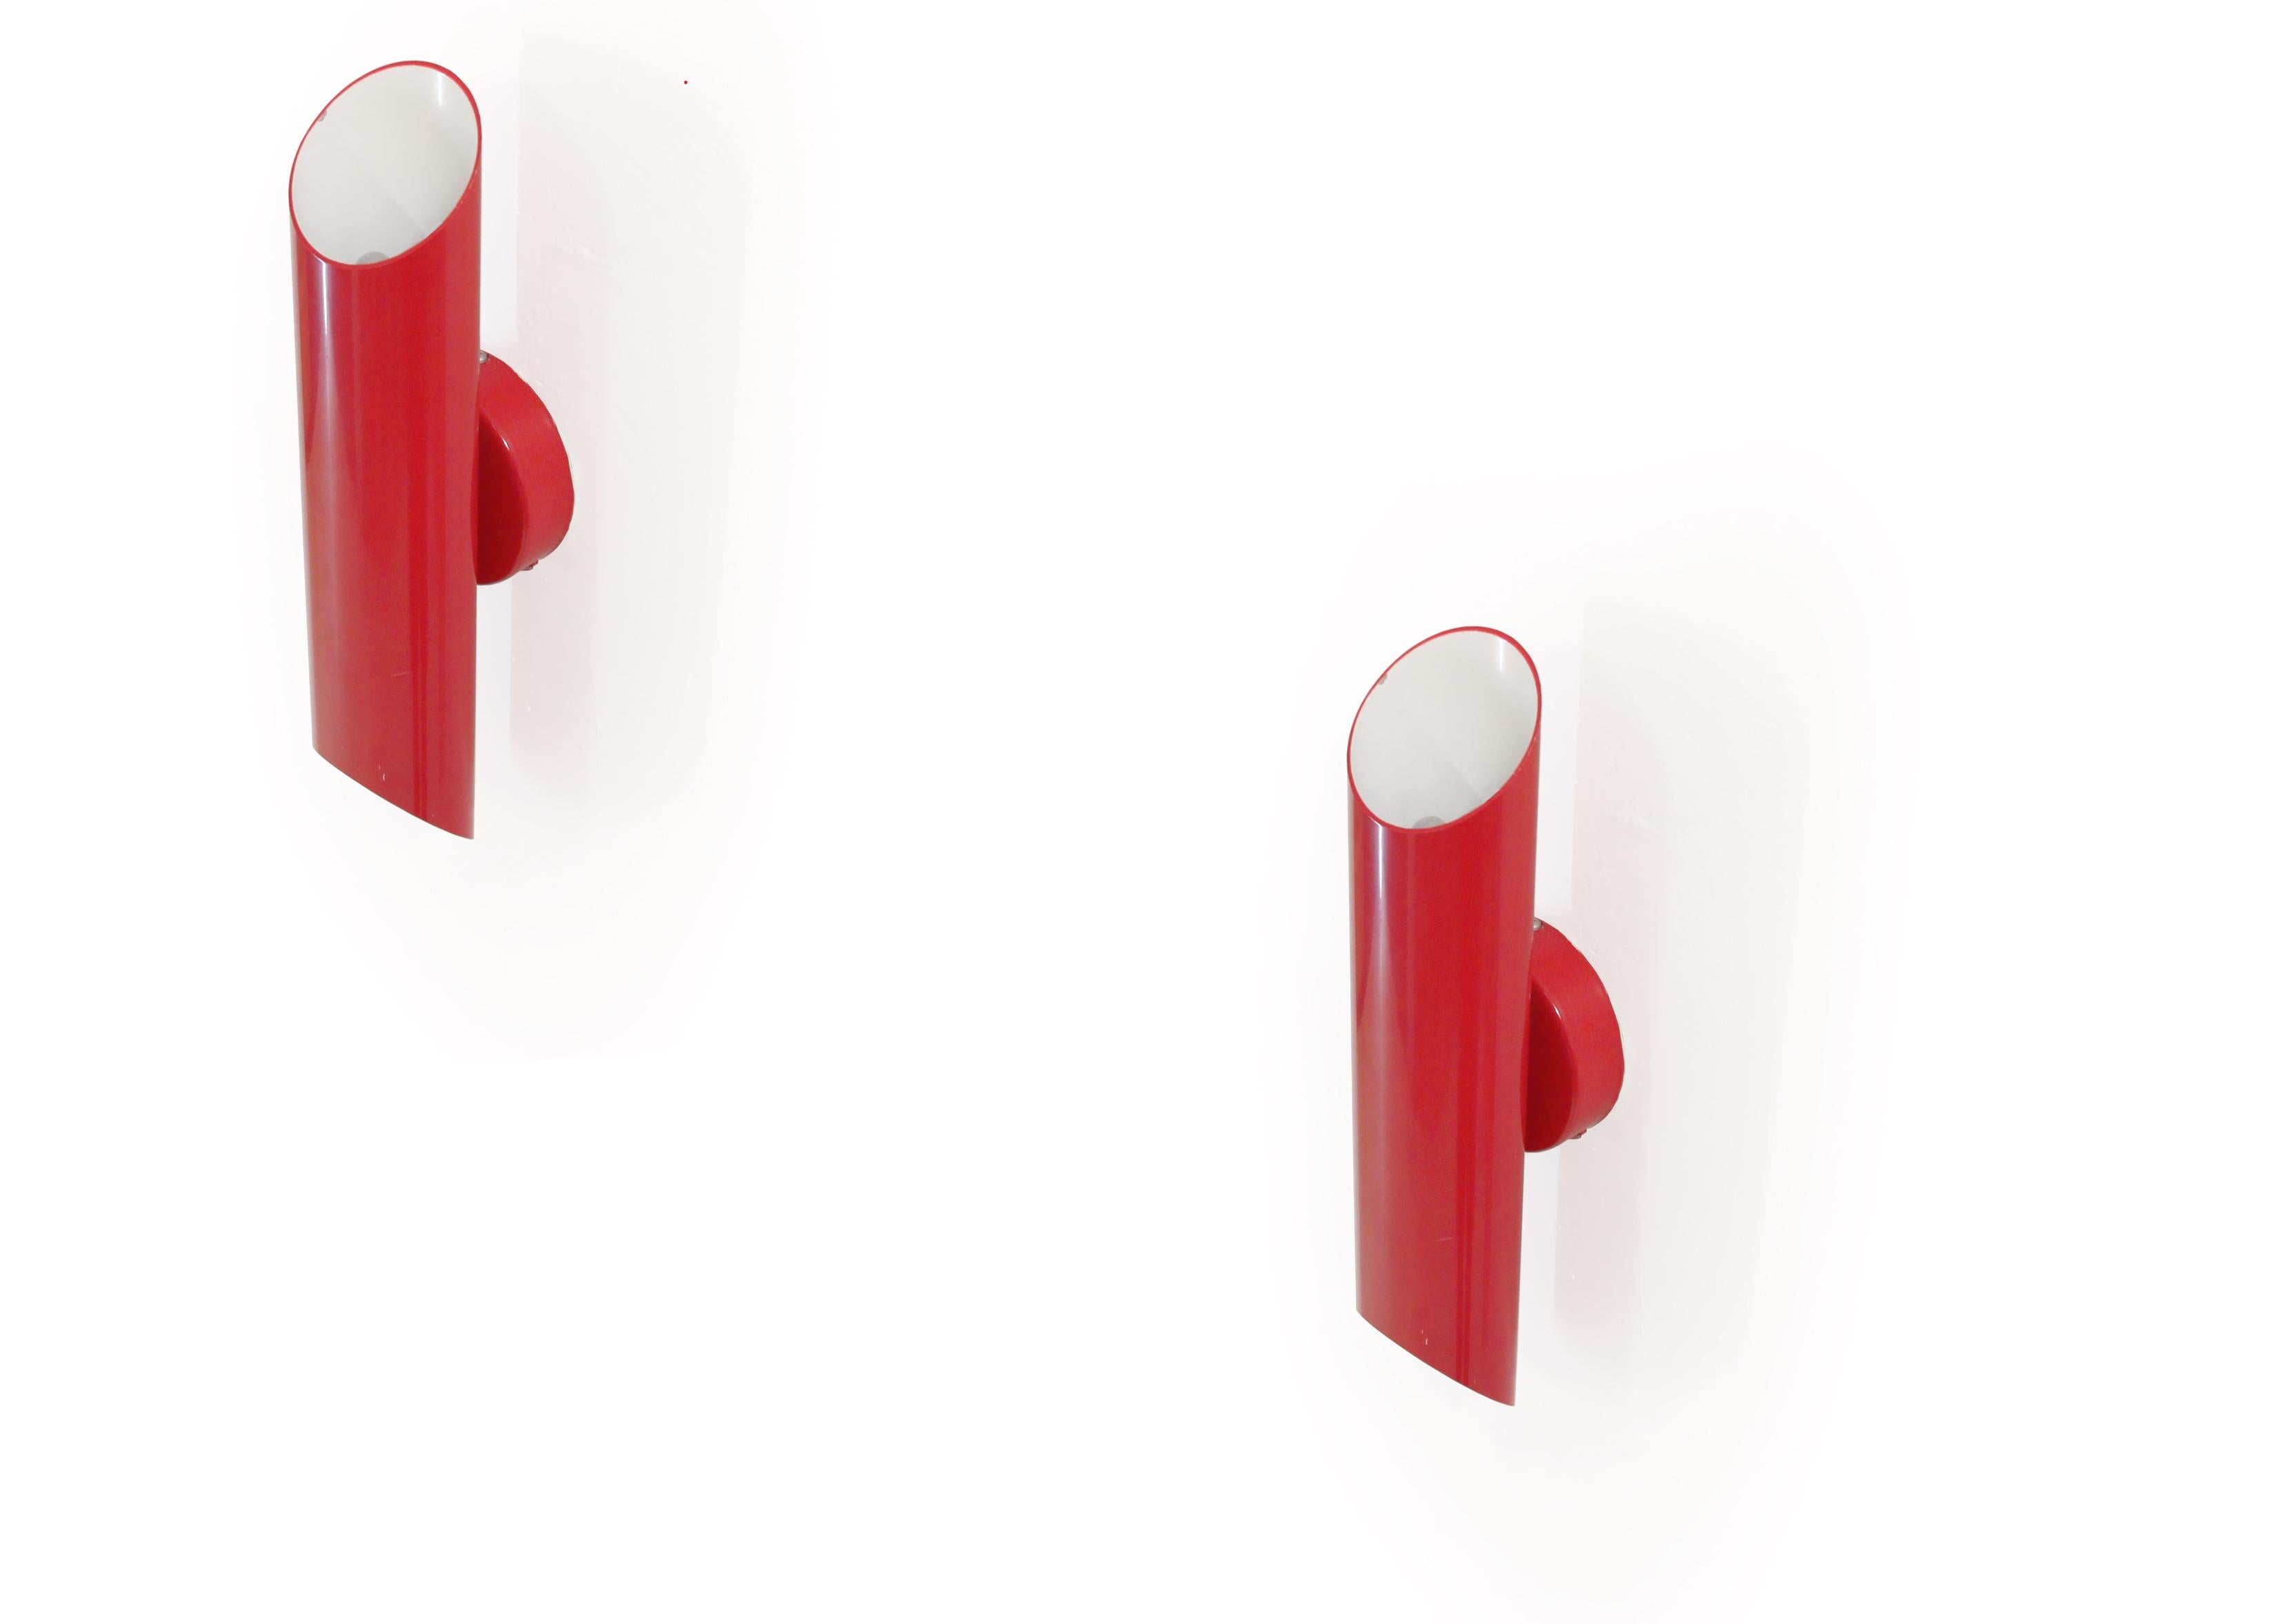 Late 20th Century Modernist Wall Lights by Jonas Hidle for Høvik Lys, 1970s